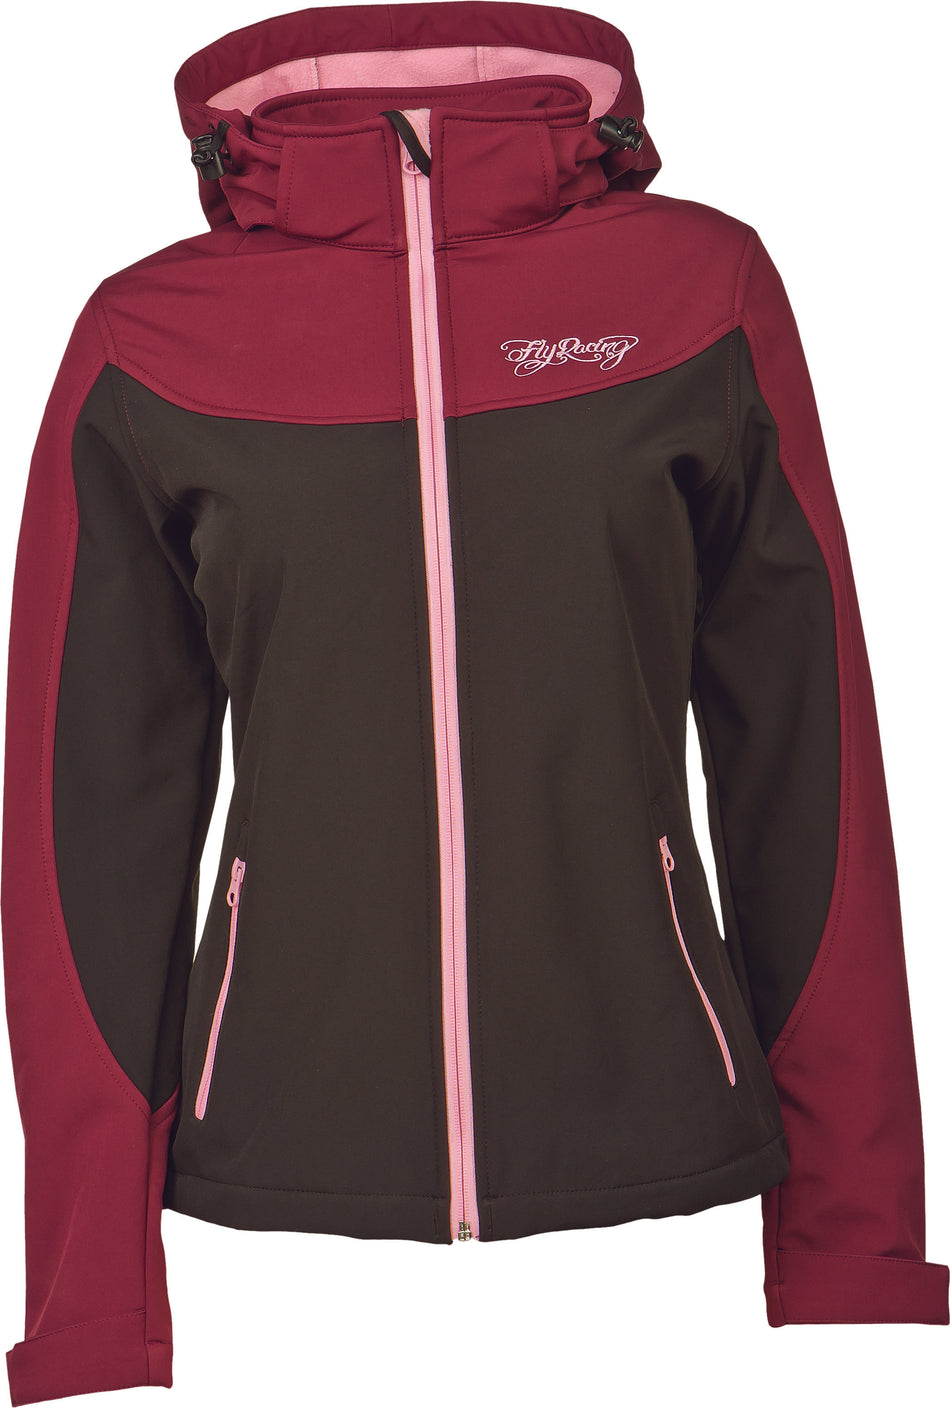 FLY RACING Pinned & Needles Jacket Berry/Black L 358-5118L